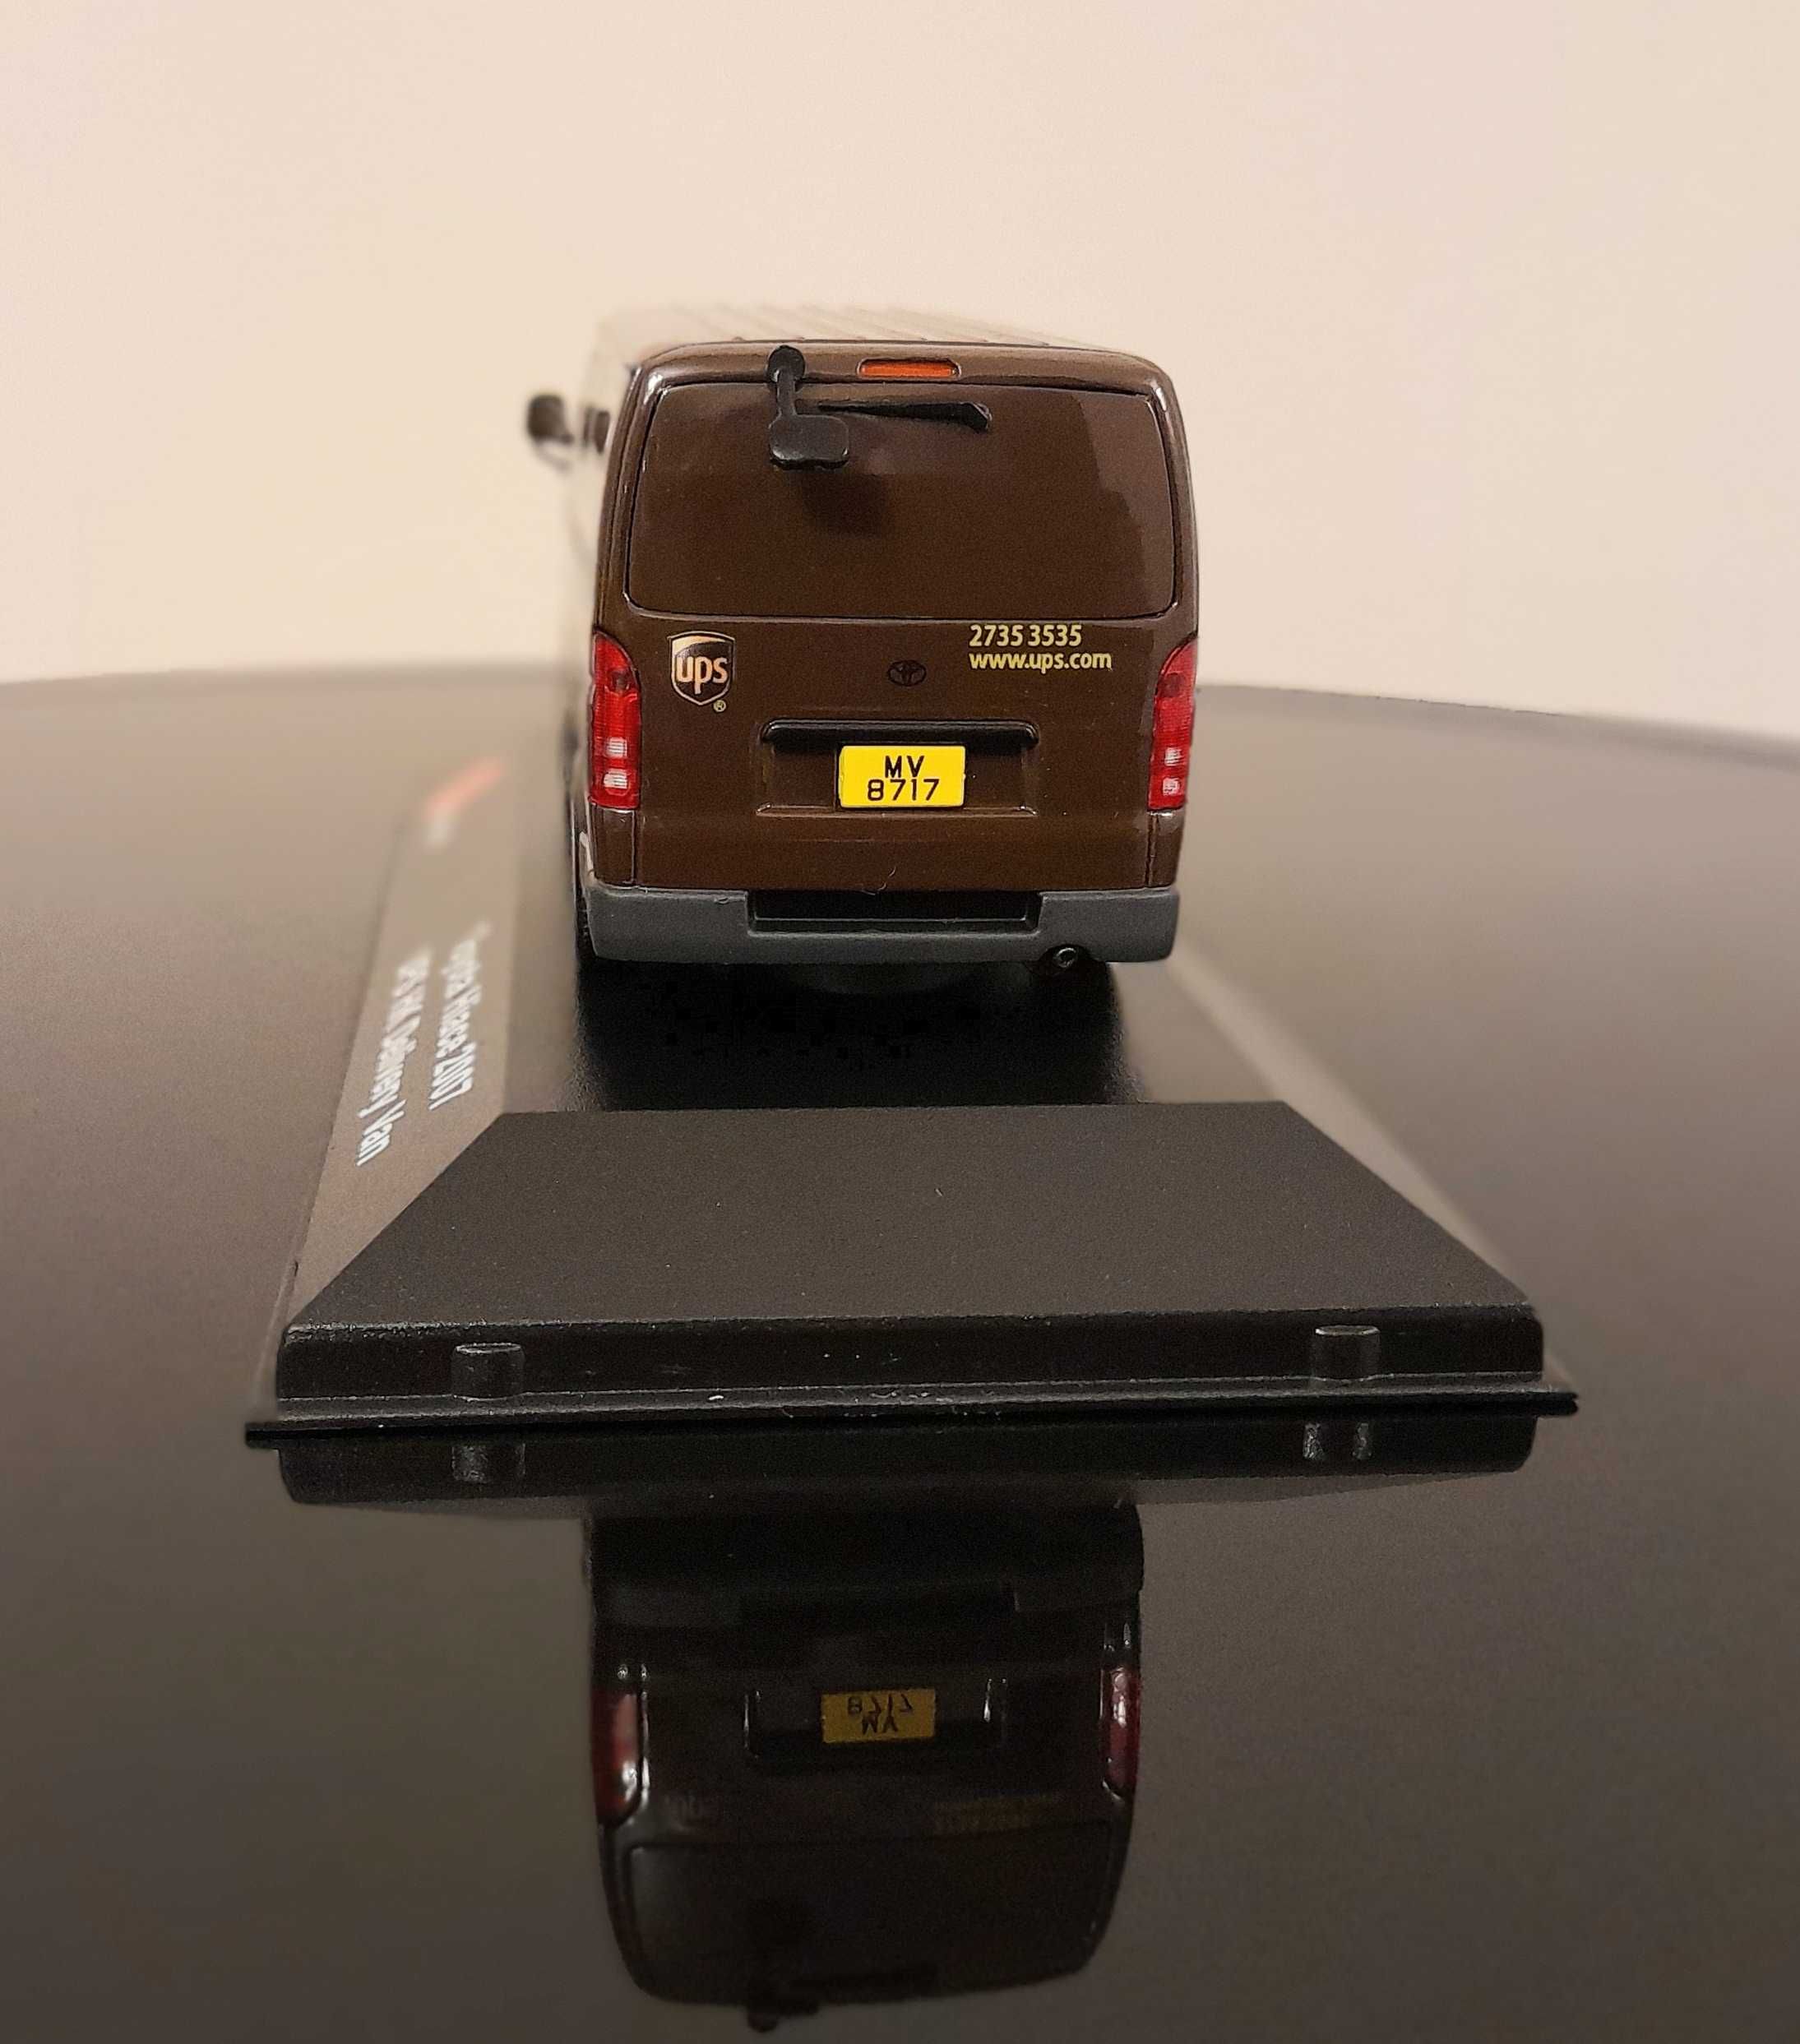 Toyota Hiace 2007 UPS HK Delivery Van 1:43 J-Collection